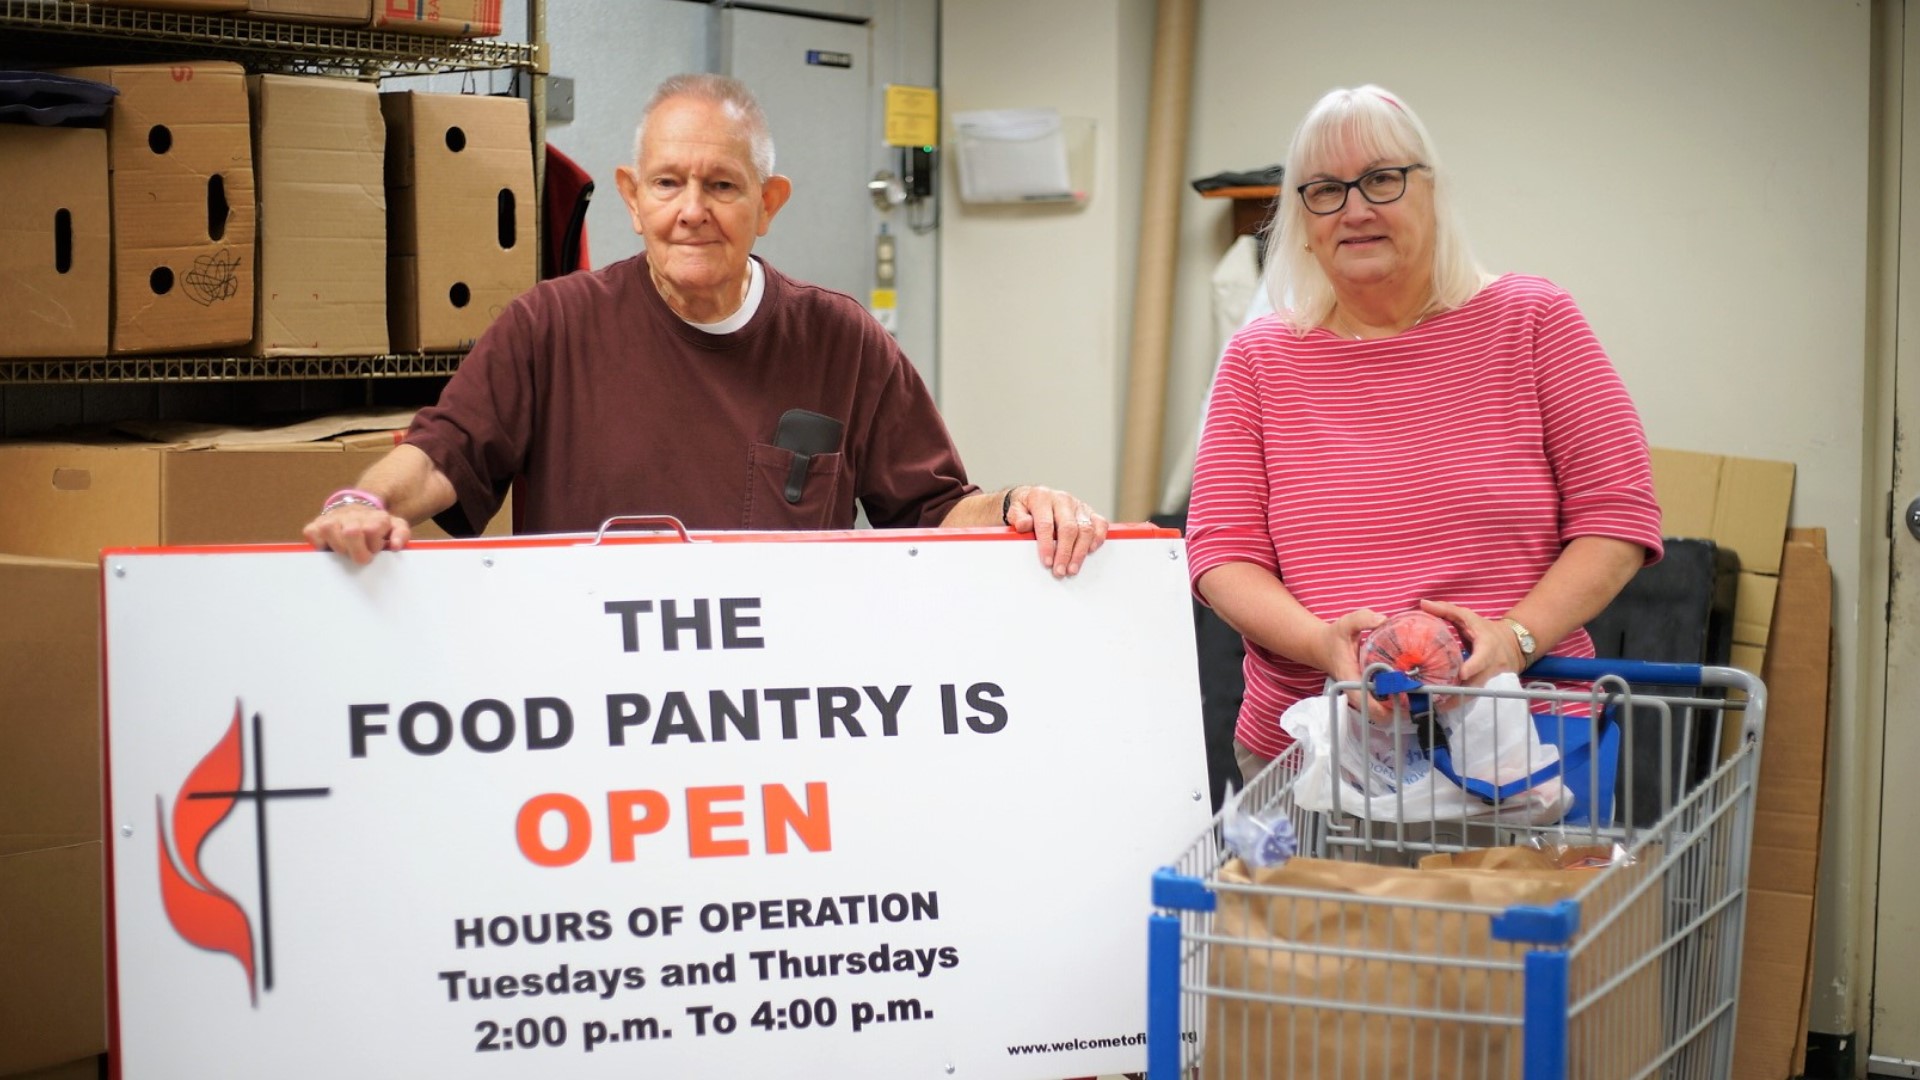 The food pantry at Warner Robins Methodist Church works with the Middle Georgia Community Food Bank to provide food to families and children facing food insecurity